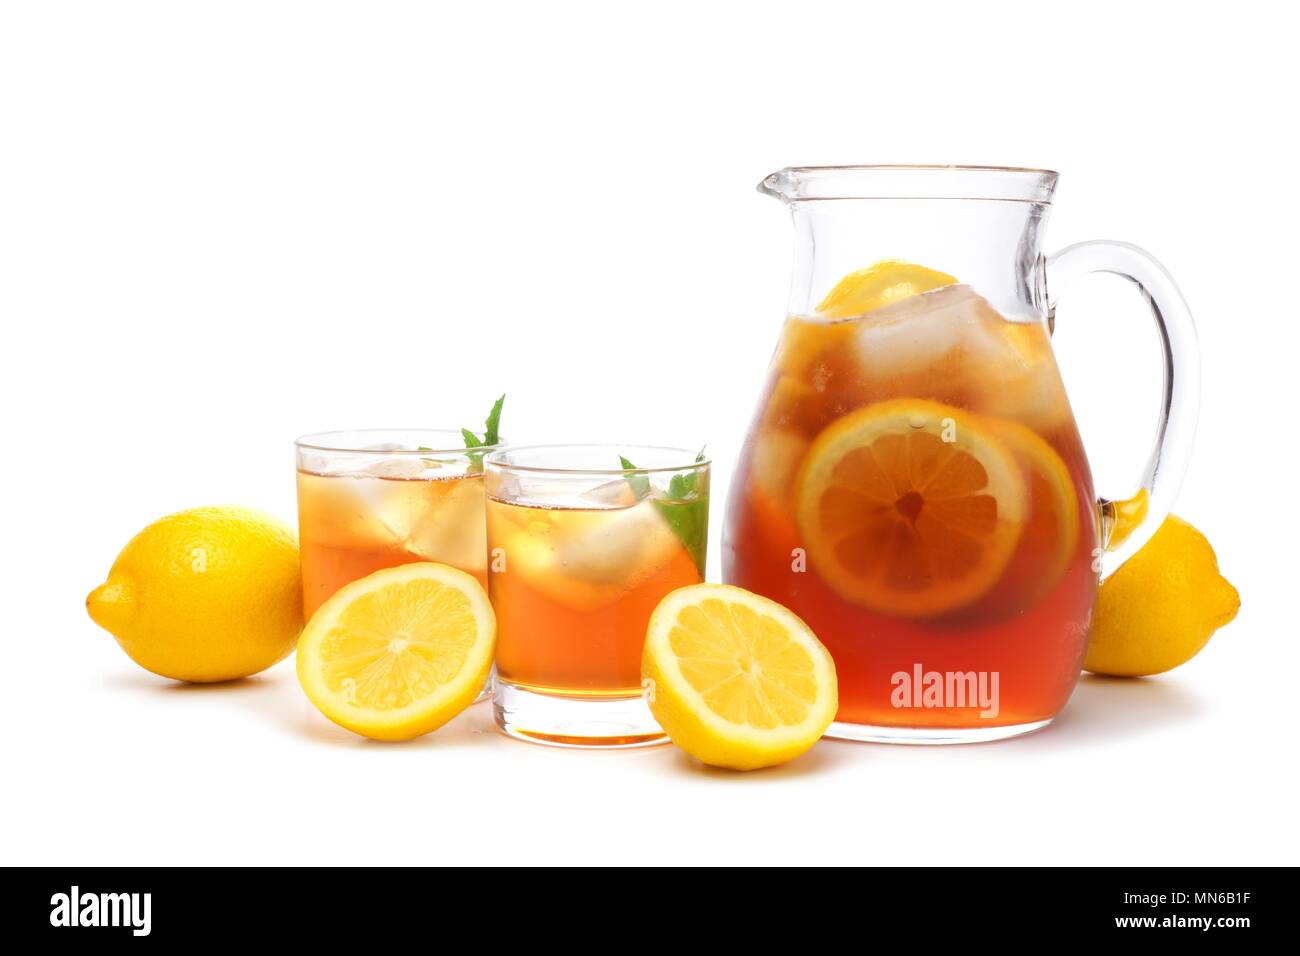 https://c8.alamy.com/comp/MN6B1F/pitcher-of-iced-tea-with-two-glasses-and-lemons-isolated-on-a-white-background-MN6B1F.jpg